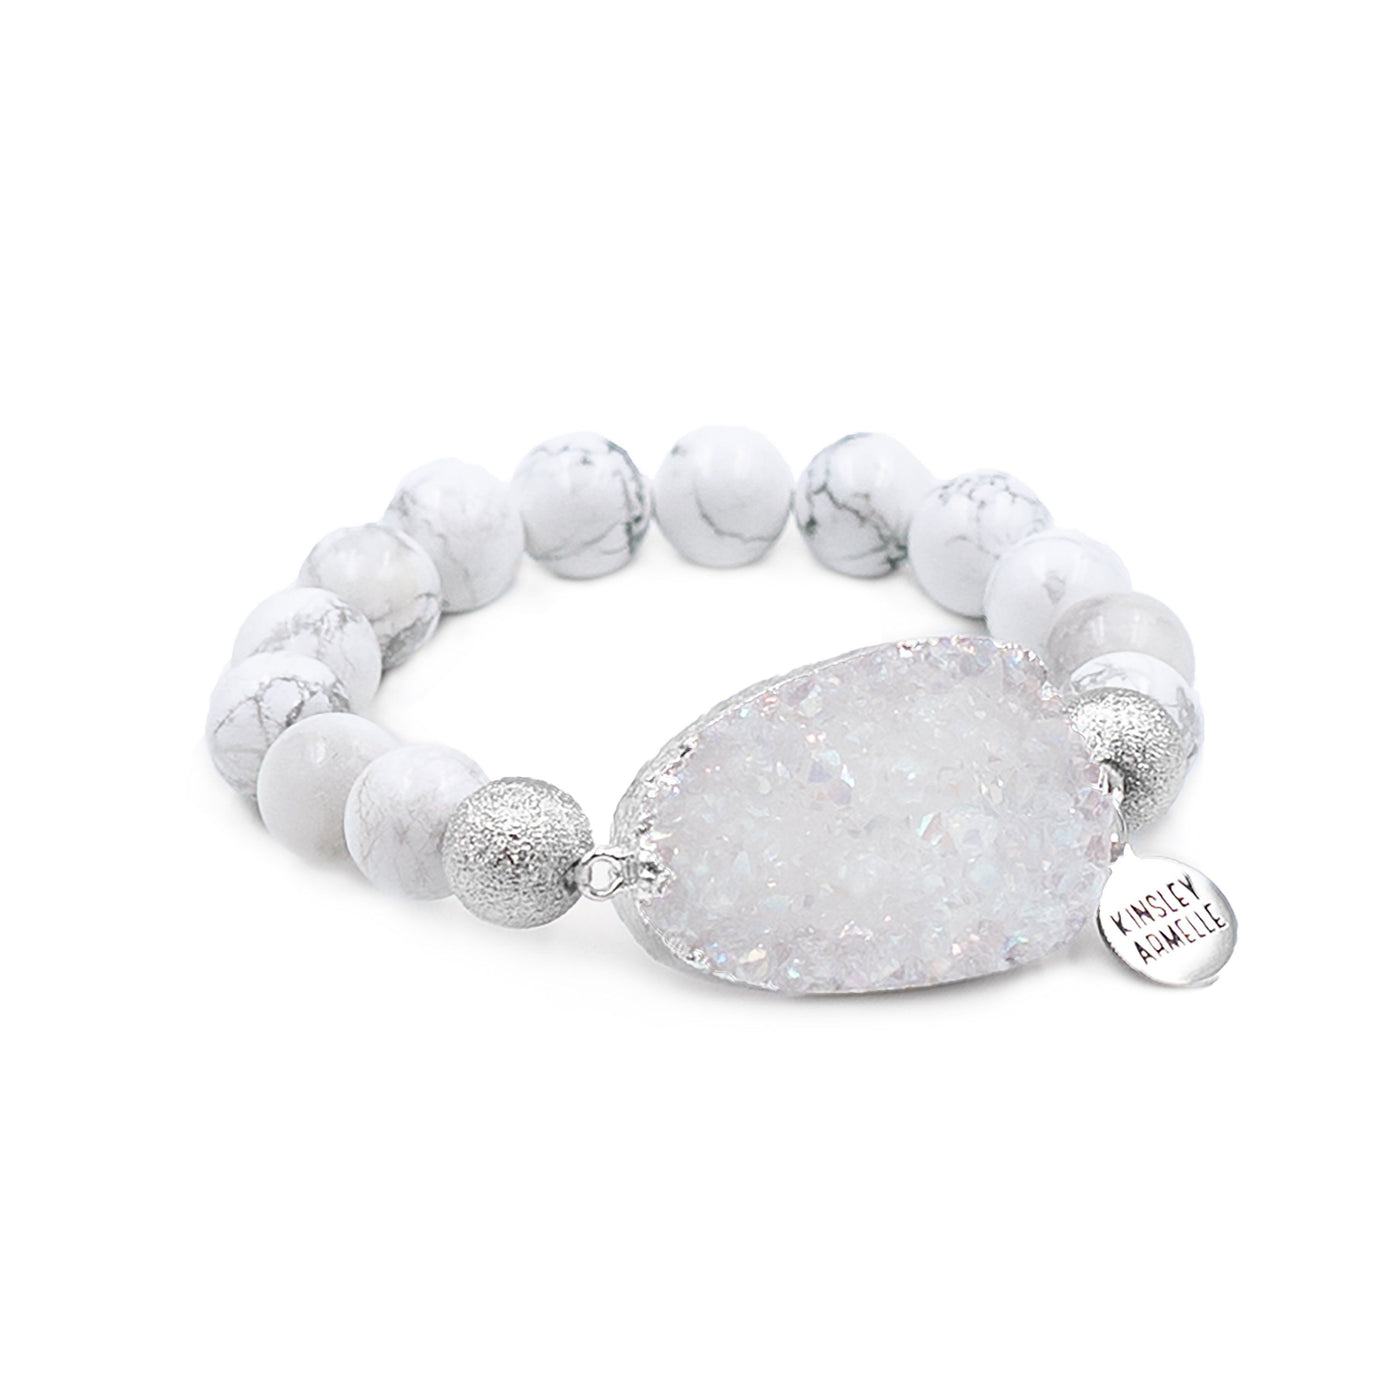 Stone Collection - Silver Pepper Bracelet-W Jewelry-Graceful & Chic Boutique, Family Clothing Store in Waxahachie, Texas